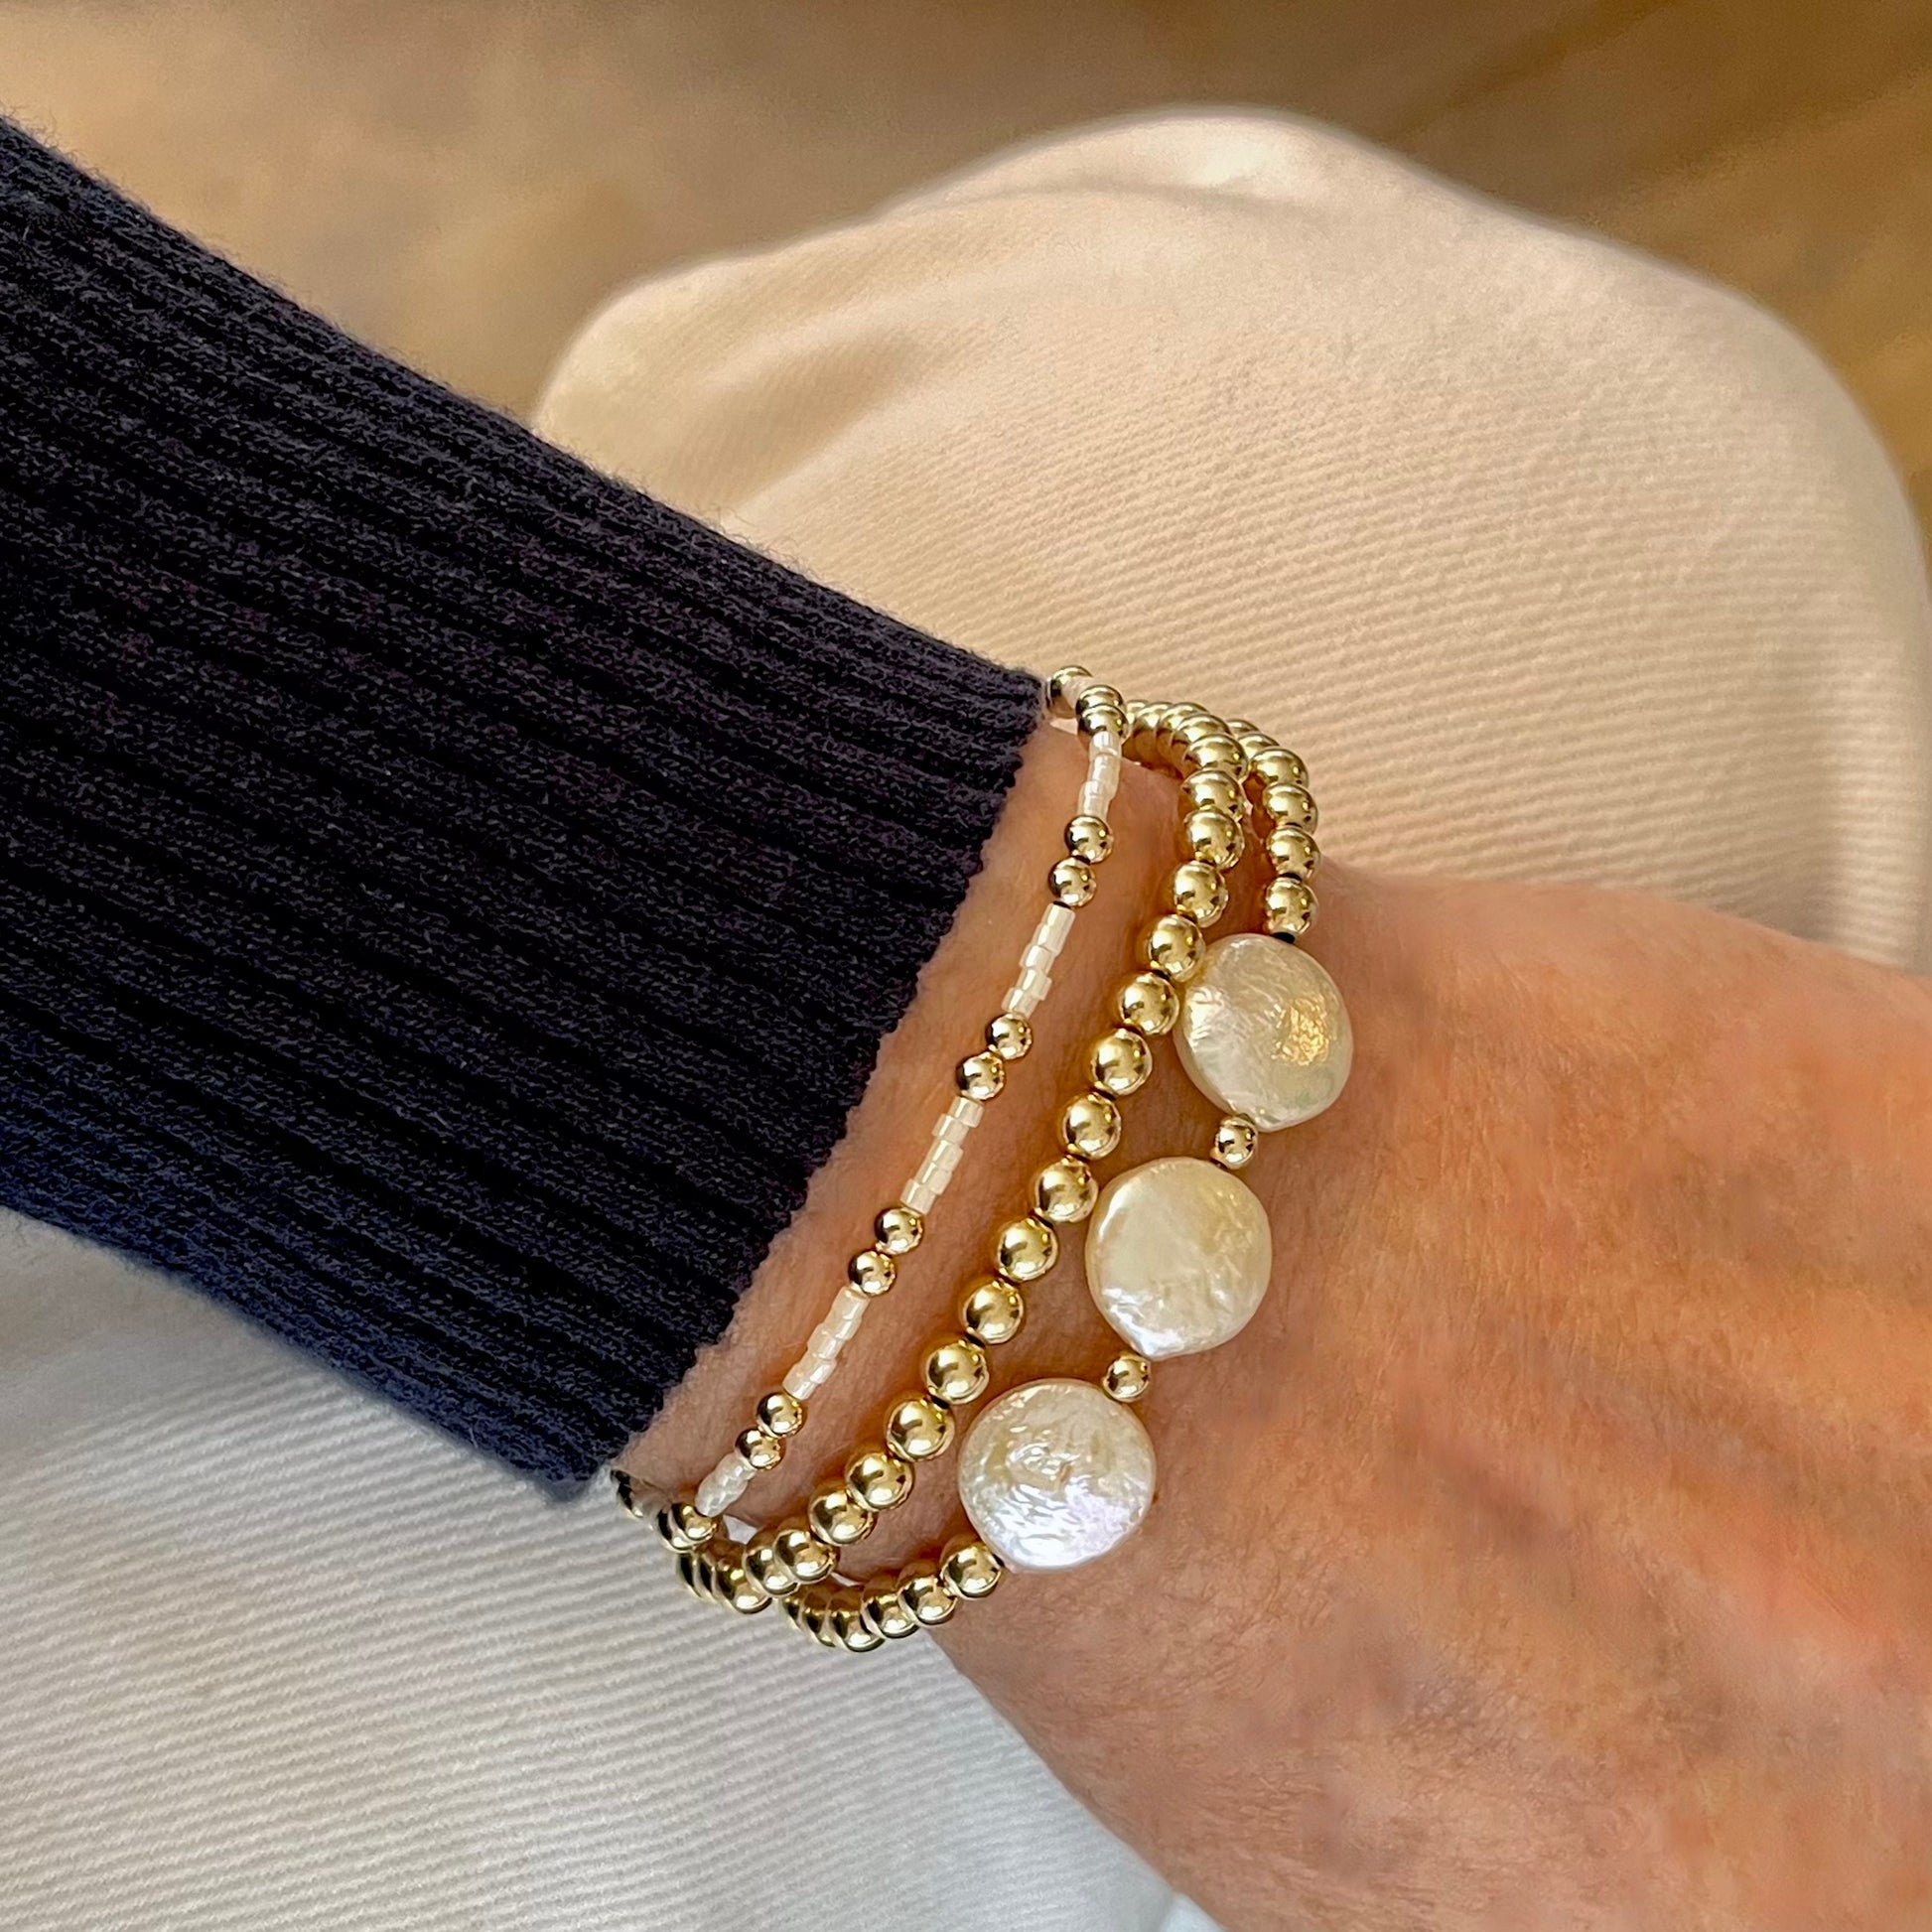 Gold bracelet stack of 3 with freshwater coin pearls and tiny white seed beads on stretchy elastic.